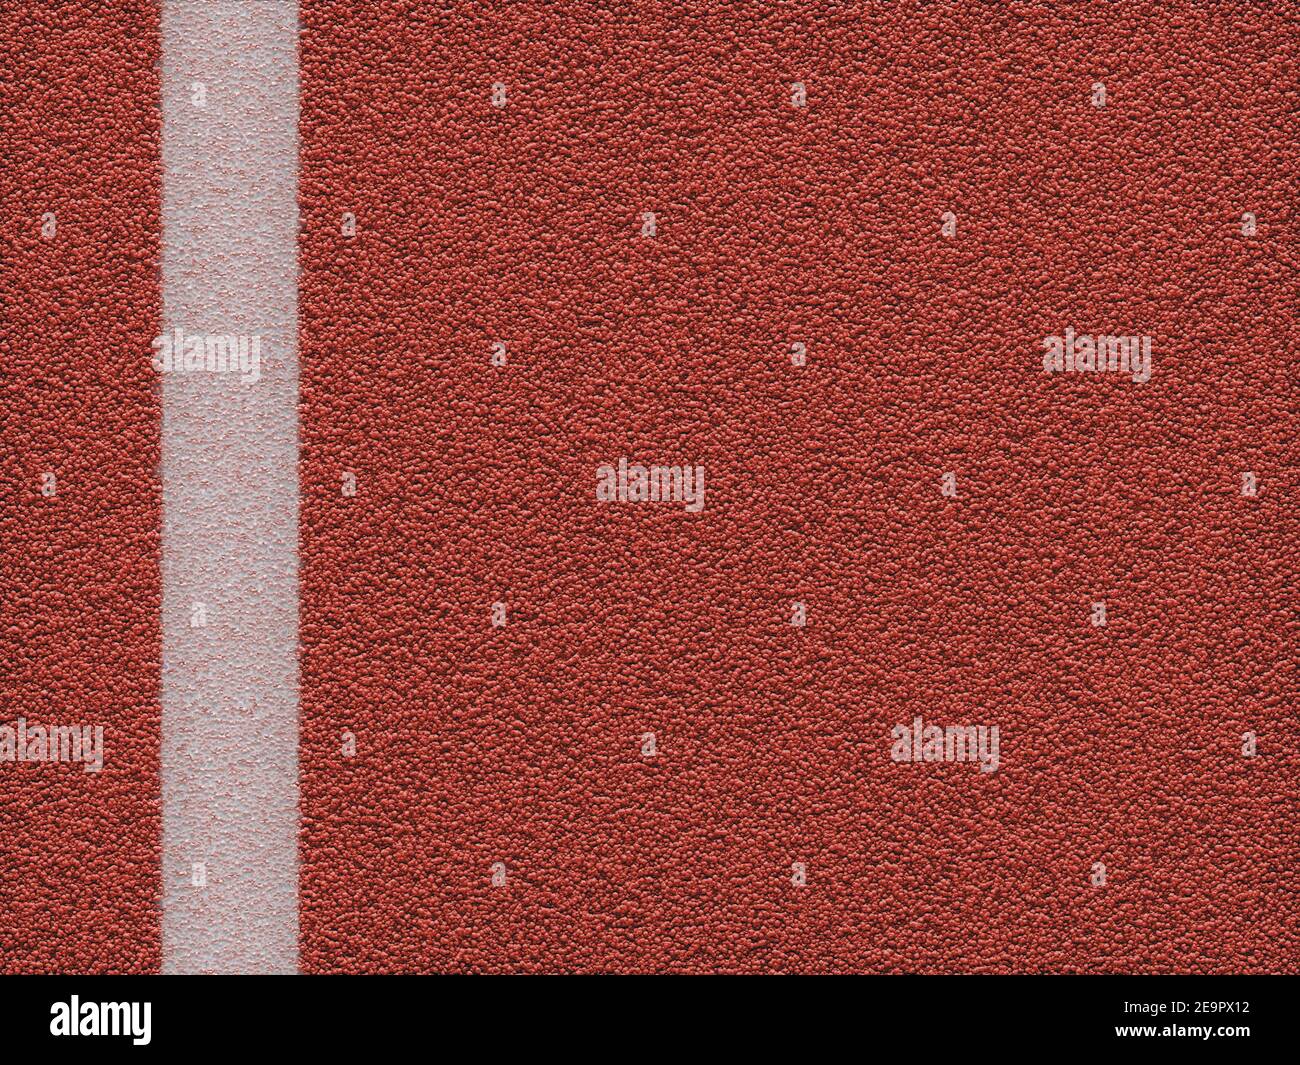 Running track from the top view. Flat and uniform color image in high resolution. Stock Photo